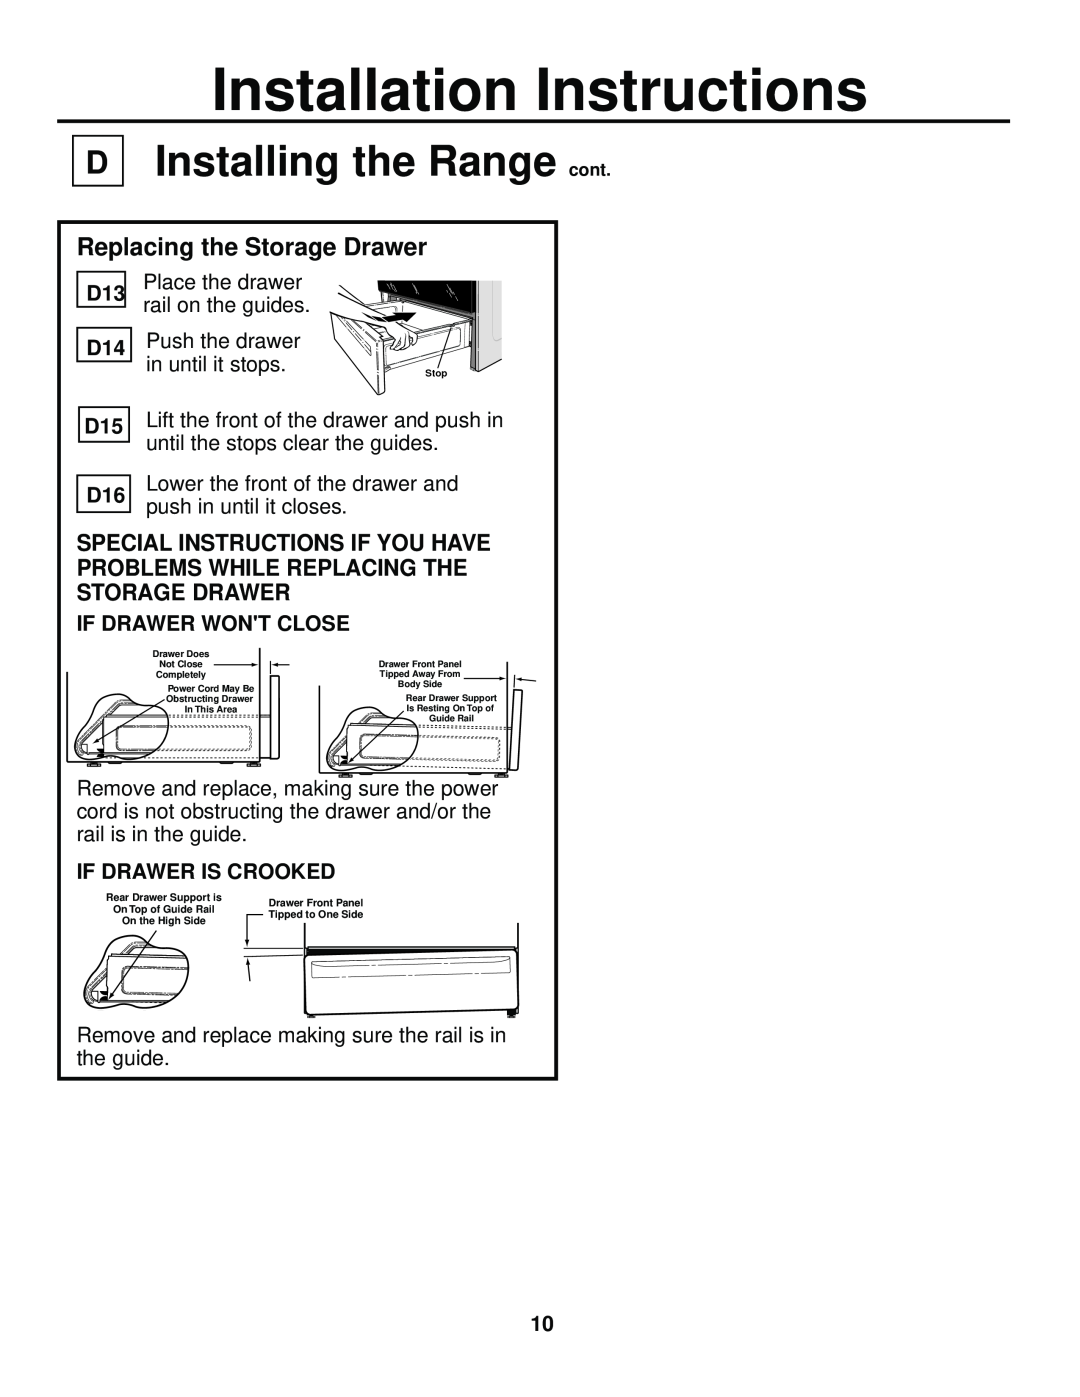 GE 229C4053P447-3 1, 31-10463 Installing the Range cont, Replacing the Storage Drawer, Installation Instructions 